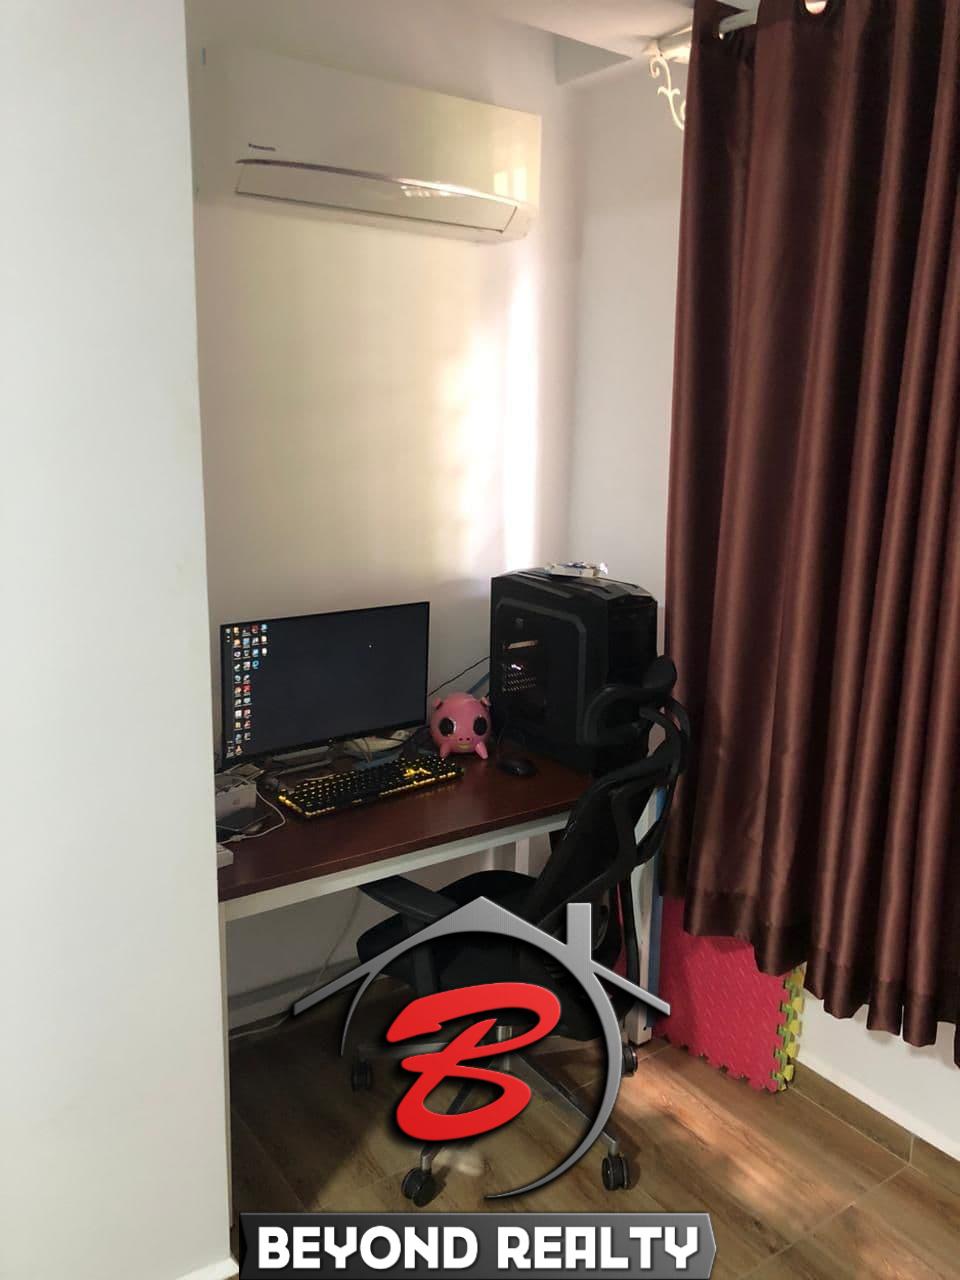 the bedroom of the resale 1-bedroom condo for sale at Cvik Apartments 2 in Sangkat 4 in Sihanoukville